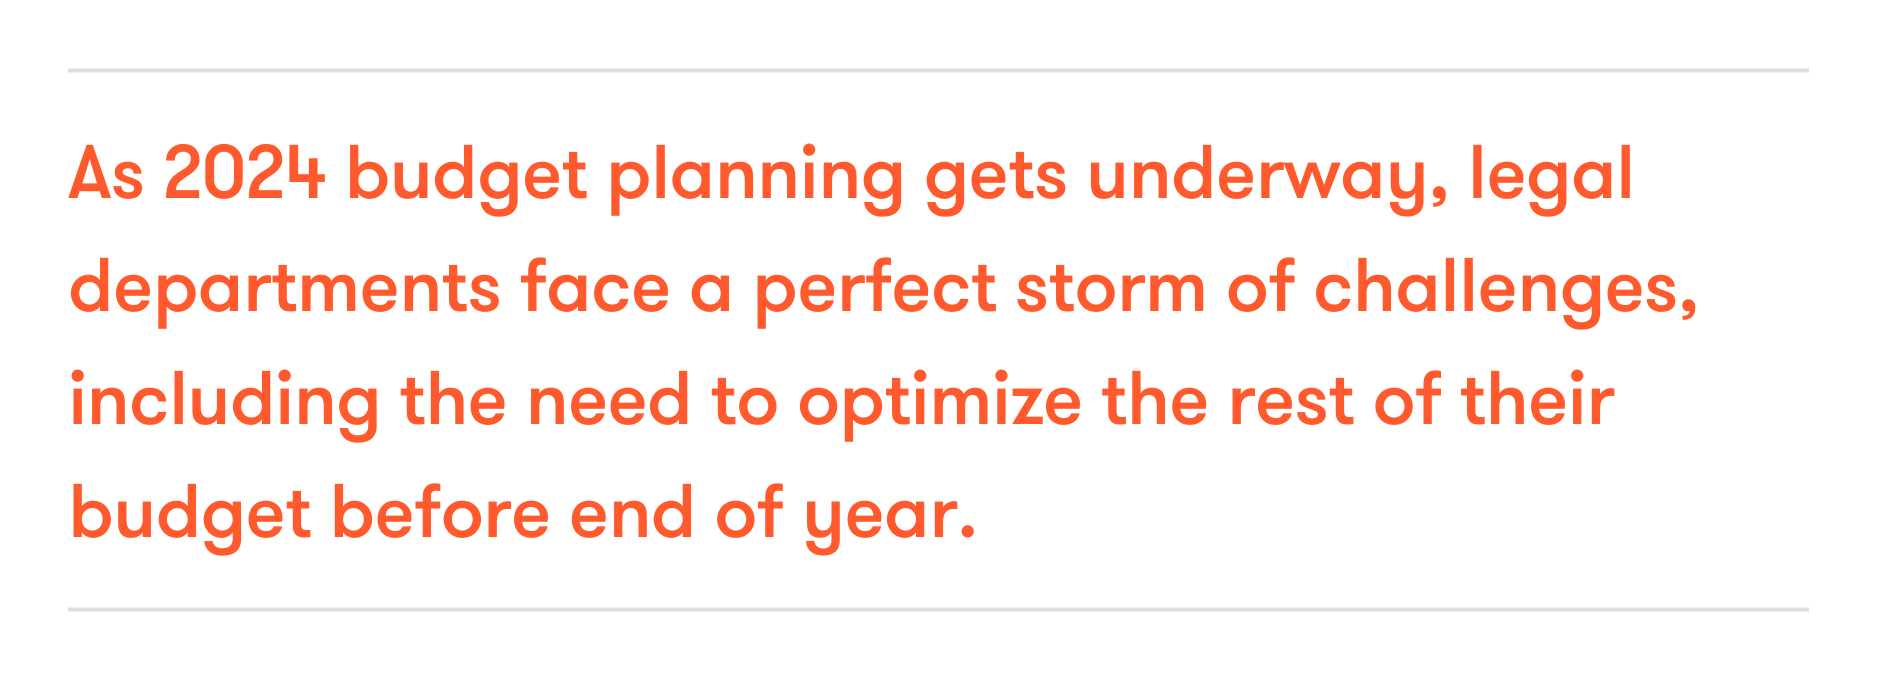 Image of quote stating "As 2024 budget planning gets underway, legal departments face a perfect storm of challenges, including the need to optimize the rest of their budget before end of year."